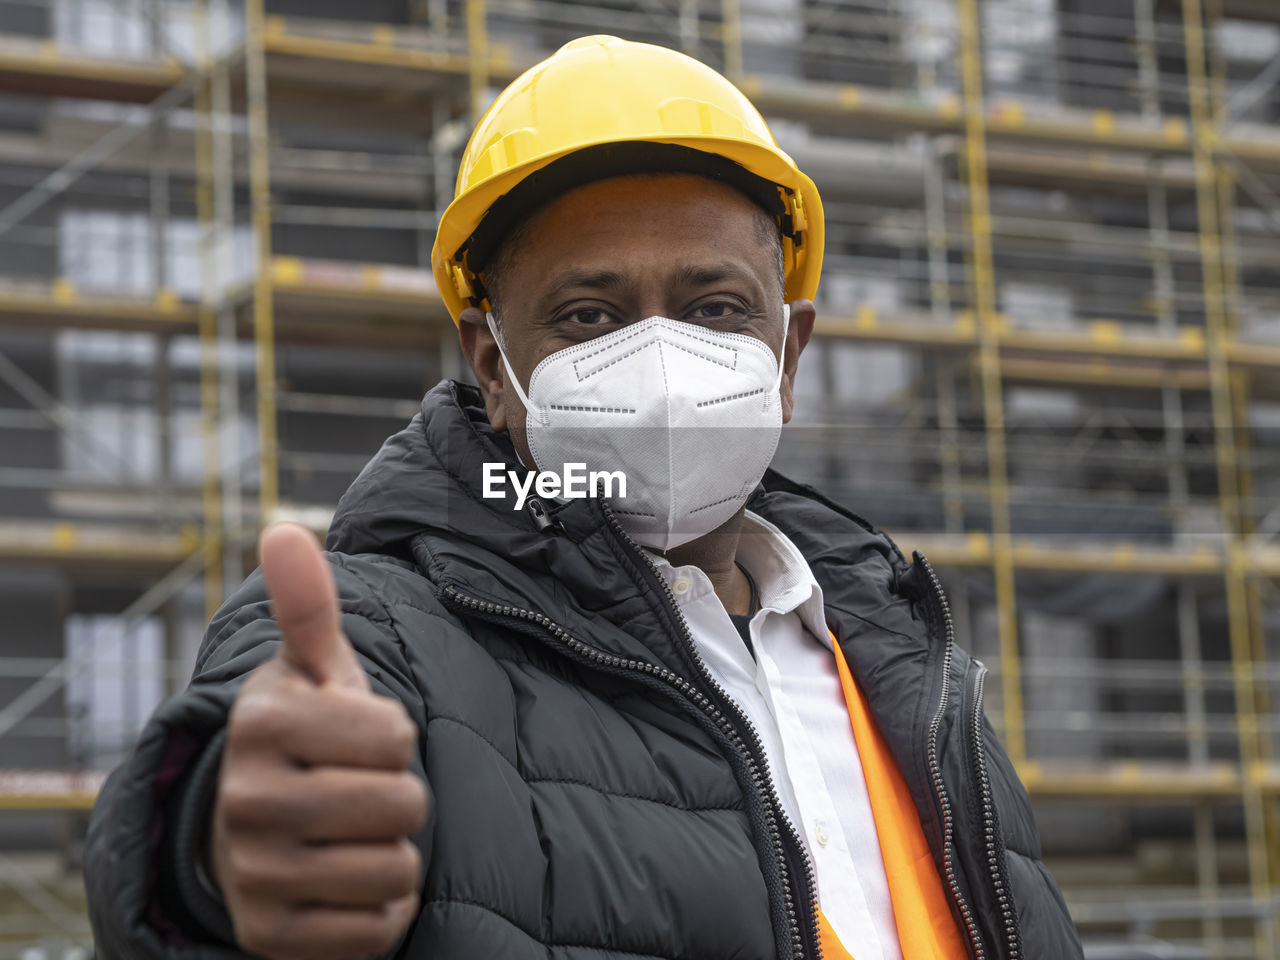 Indian construction worker wearing an ffp2 mask on construction site showing thumbs up gesture